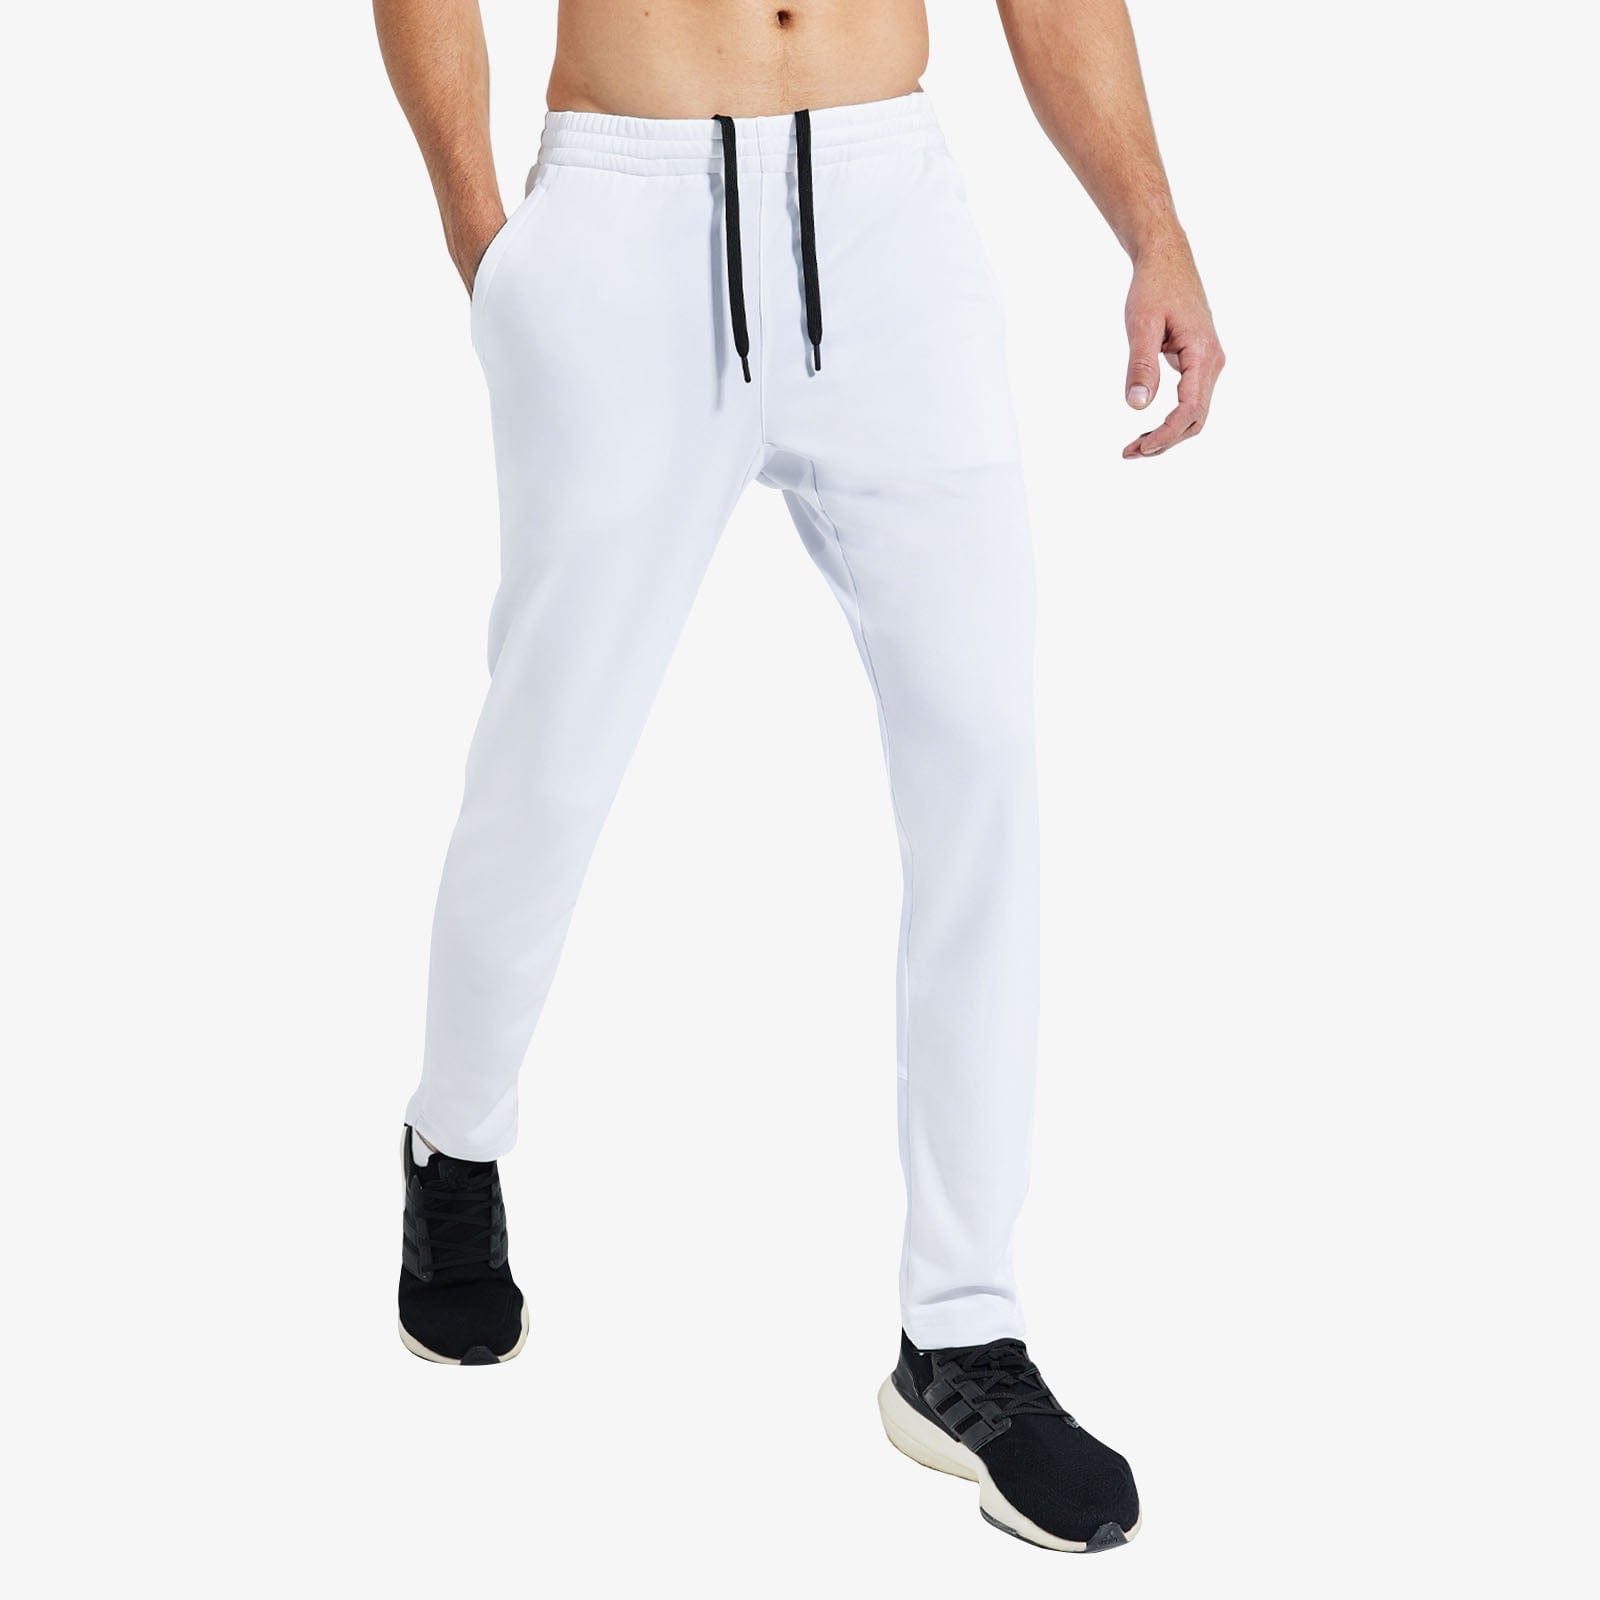 Men’s Sweatpants with Pockets Athletic Track Joggers - White / S